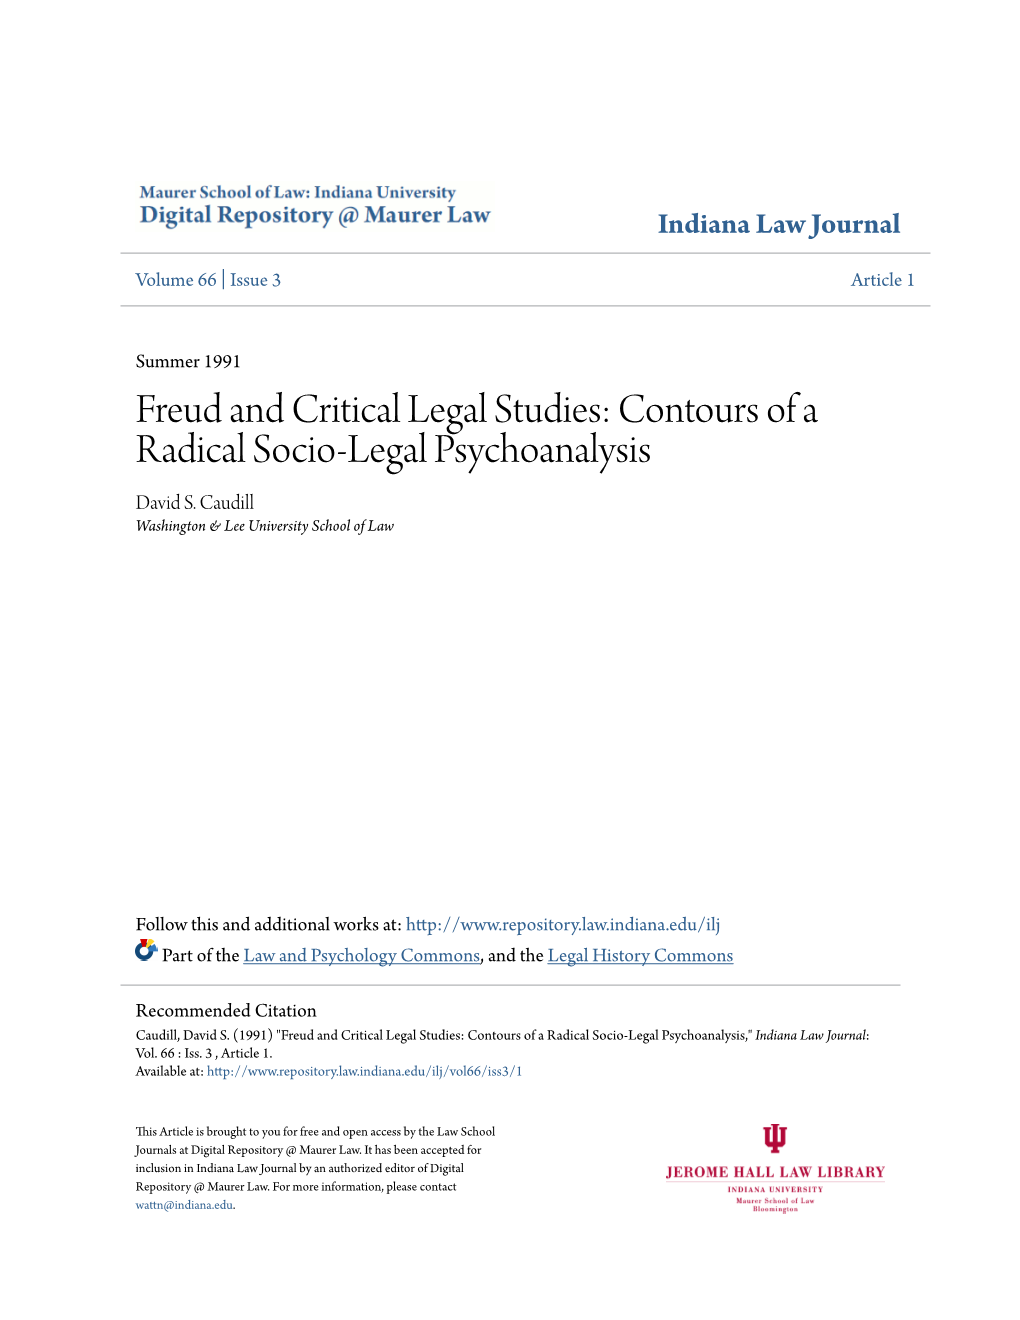 Freud and Critical Legal Studies: Contours of a Radical Socio-Legal Psychoanalysis David S